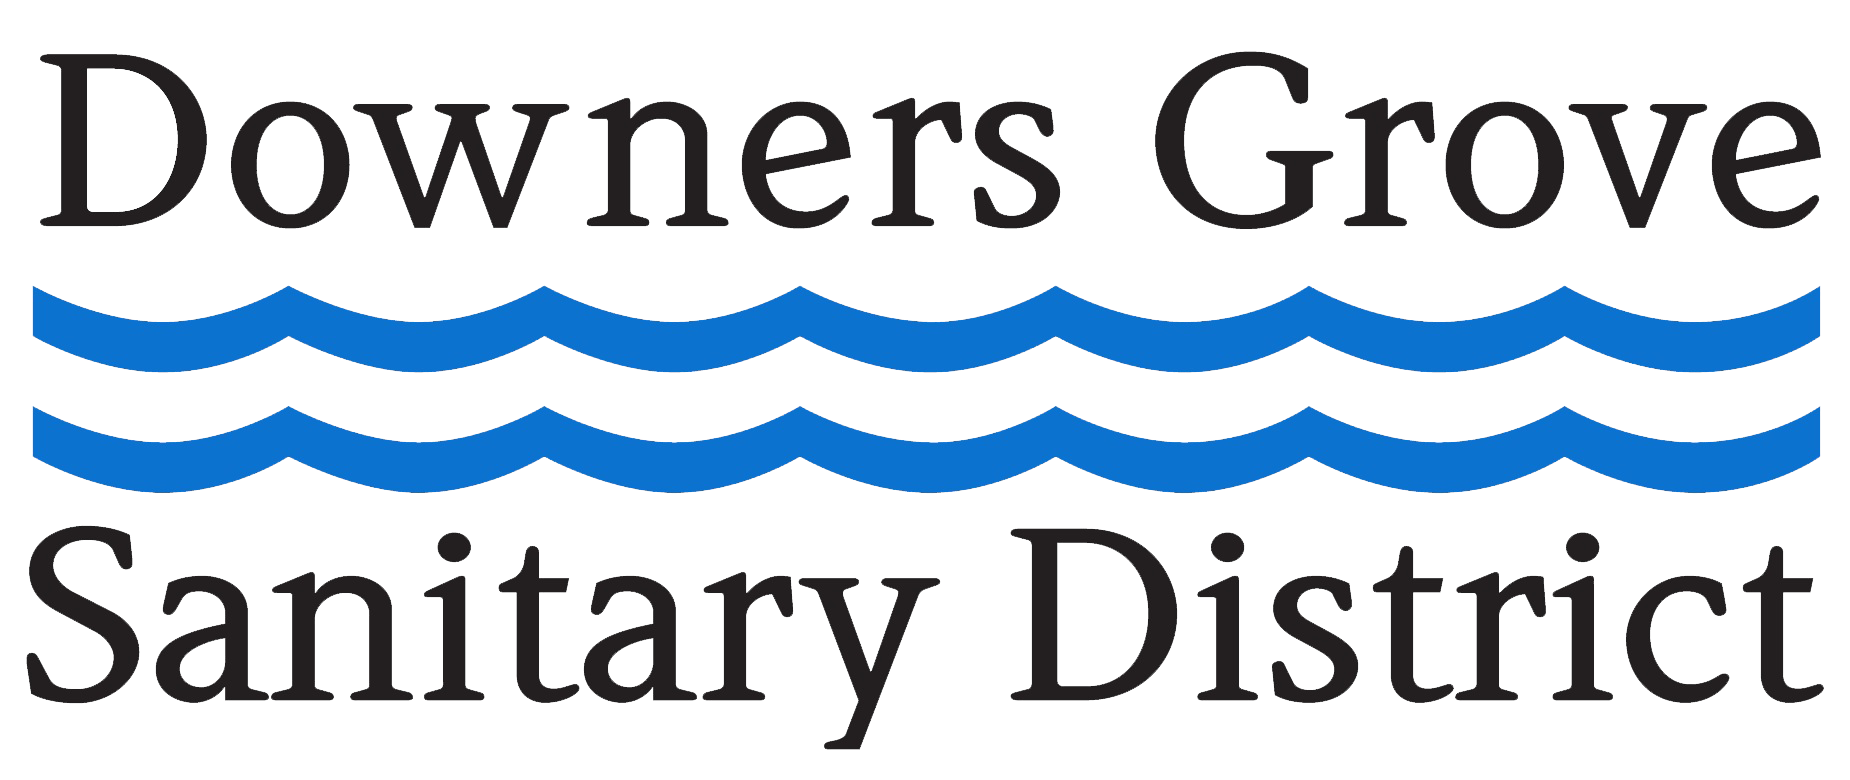 Downers Grove Sanitary District